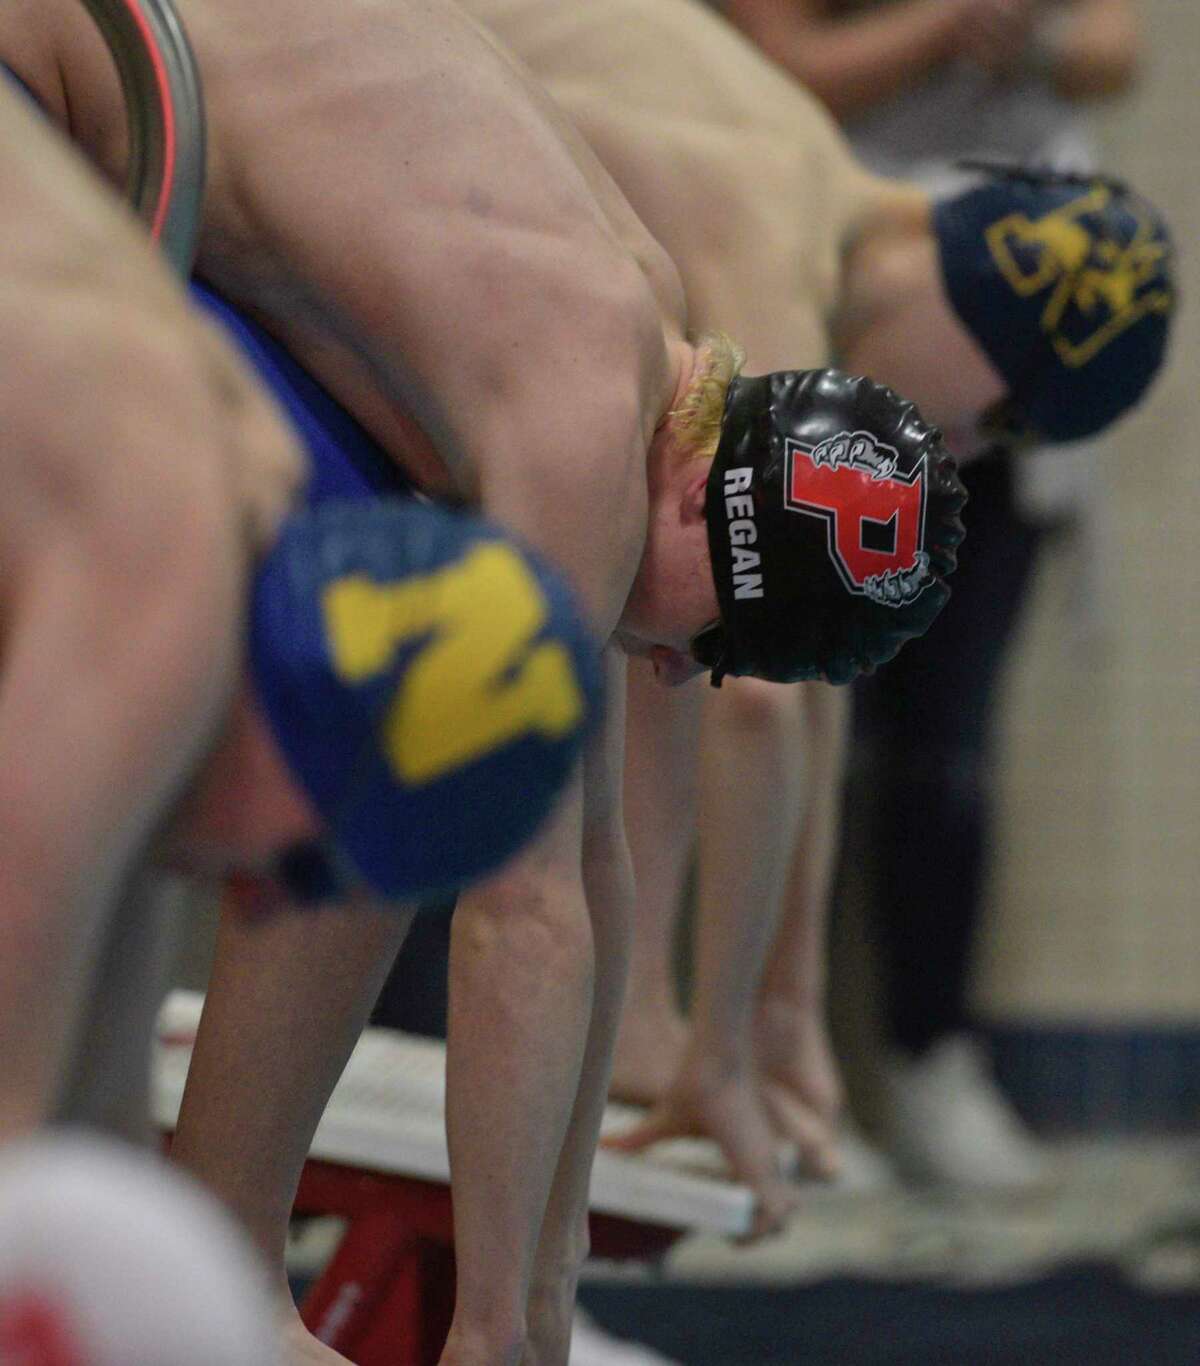 Timothy Regan, Pomperaug High School, on the starting block for the 200 Yard Freestyle during the SWC boys swimming championships, Friday night, March 6, 2020, at Masuk High School, Monroe, Conn.